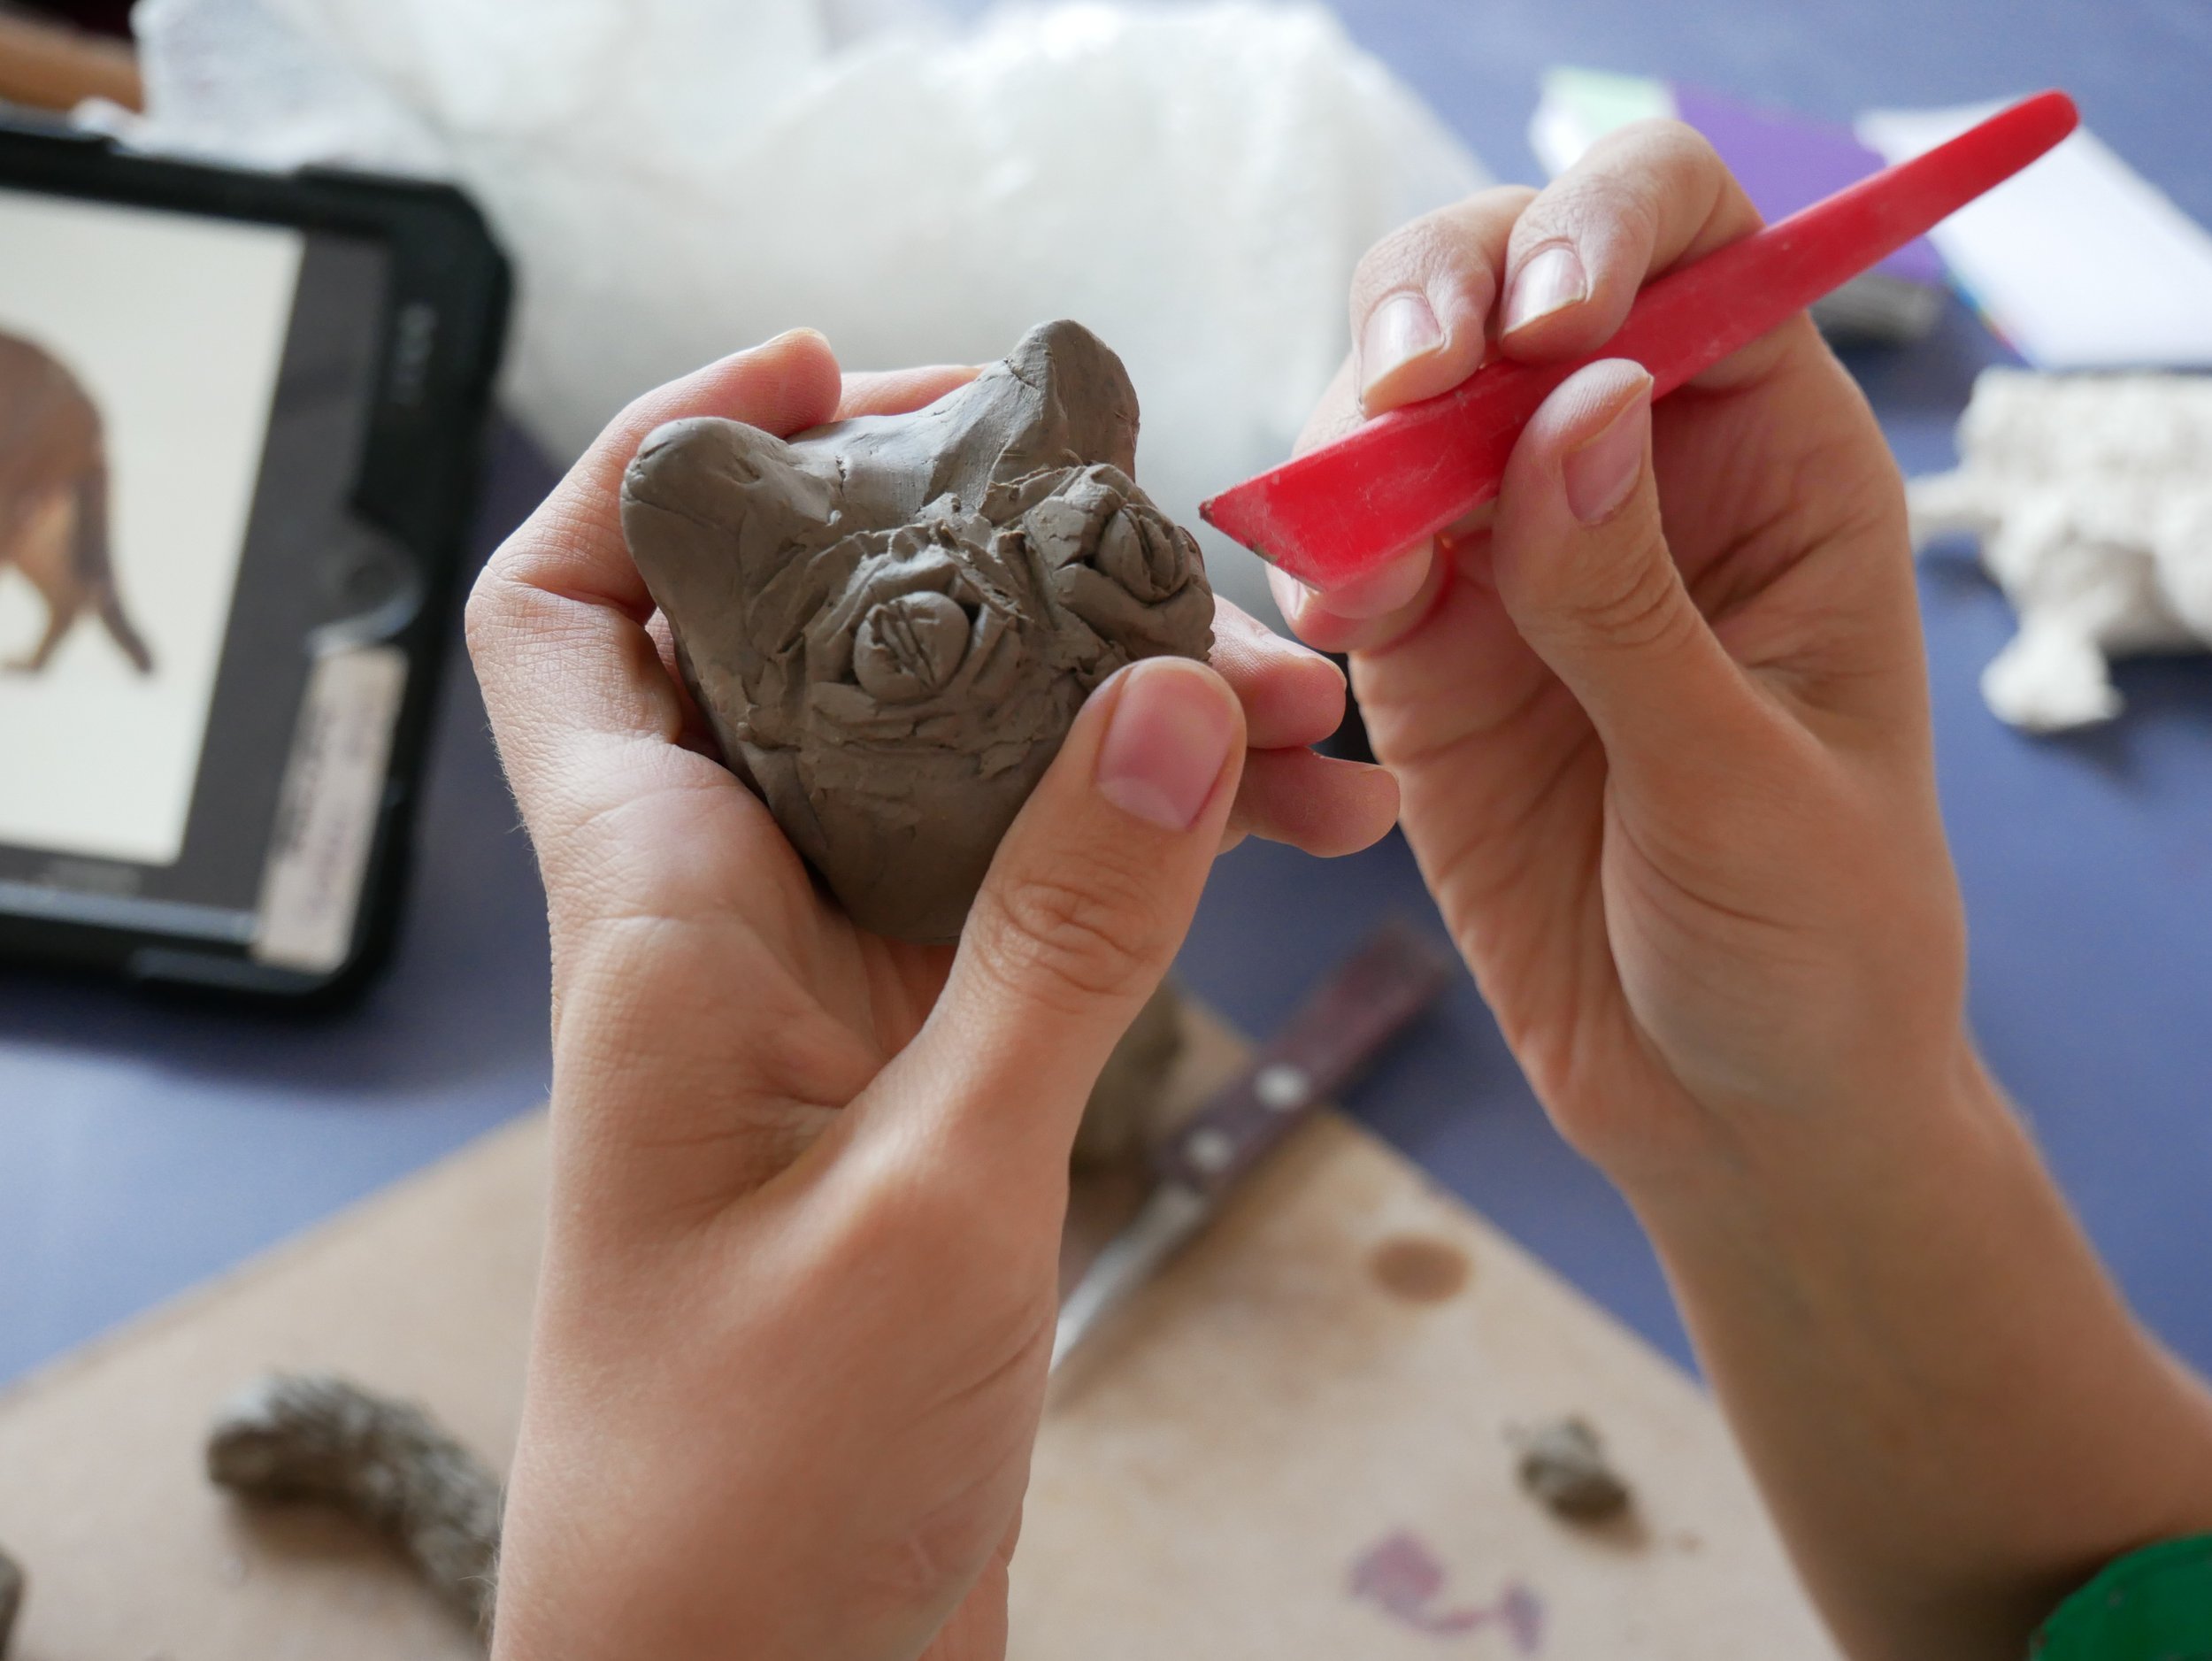  Leslie and Eleni working on clay animal sculptures together in the Venture Arts studio. Leslie is on the left and Eleni is on the right, both working on wooden boards. The photos show the animals in varying places along the journey of becoming full 